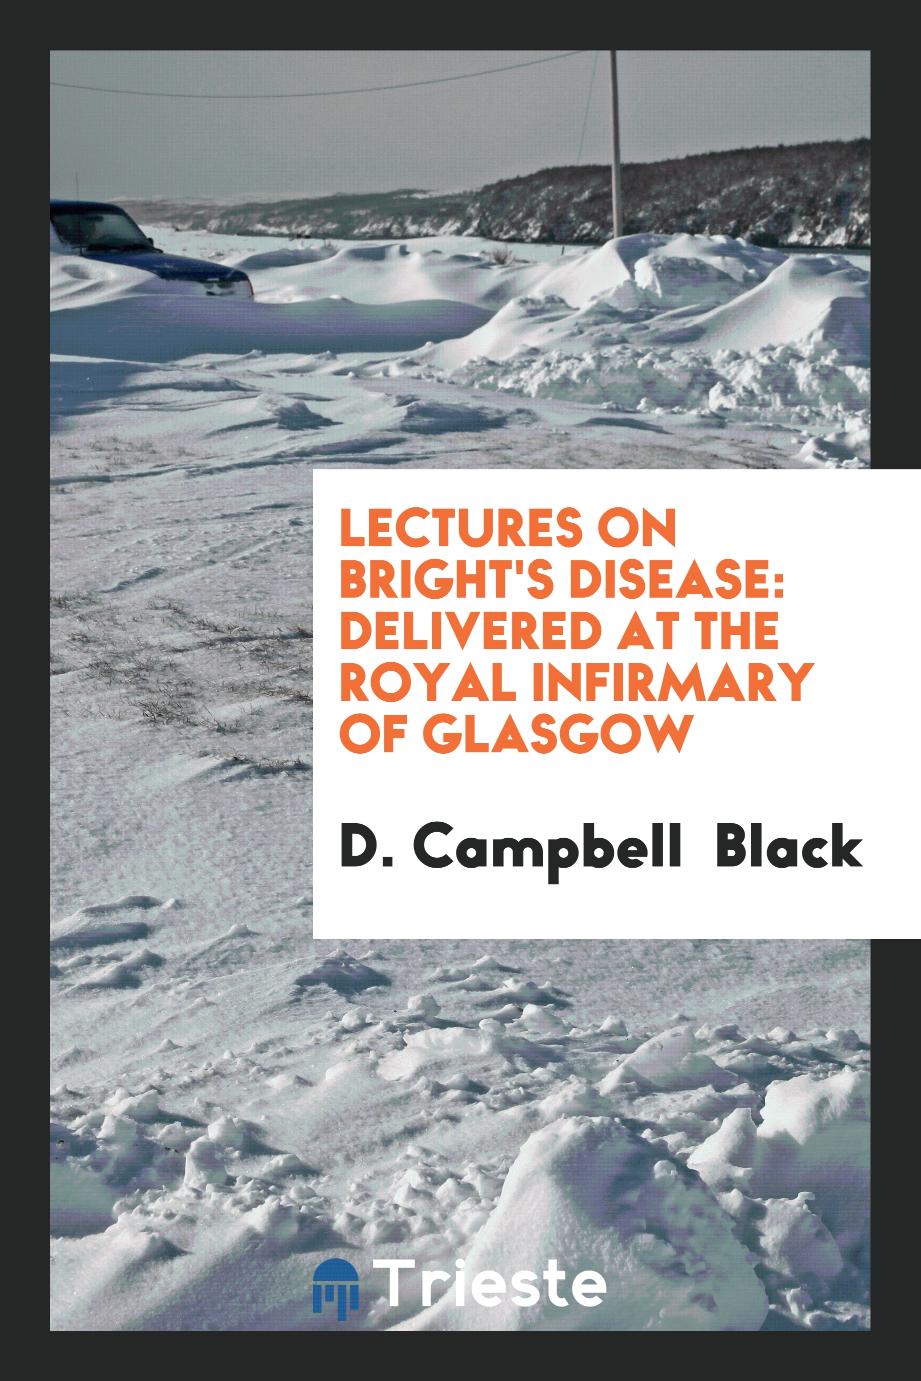 Lectures on Bright's Disease: Delivered at the Royal Infirmary of Glasgow